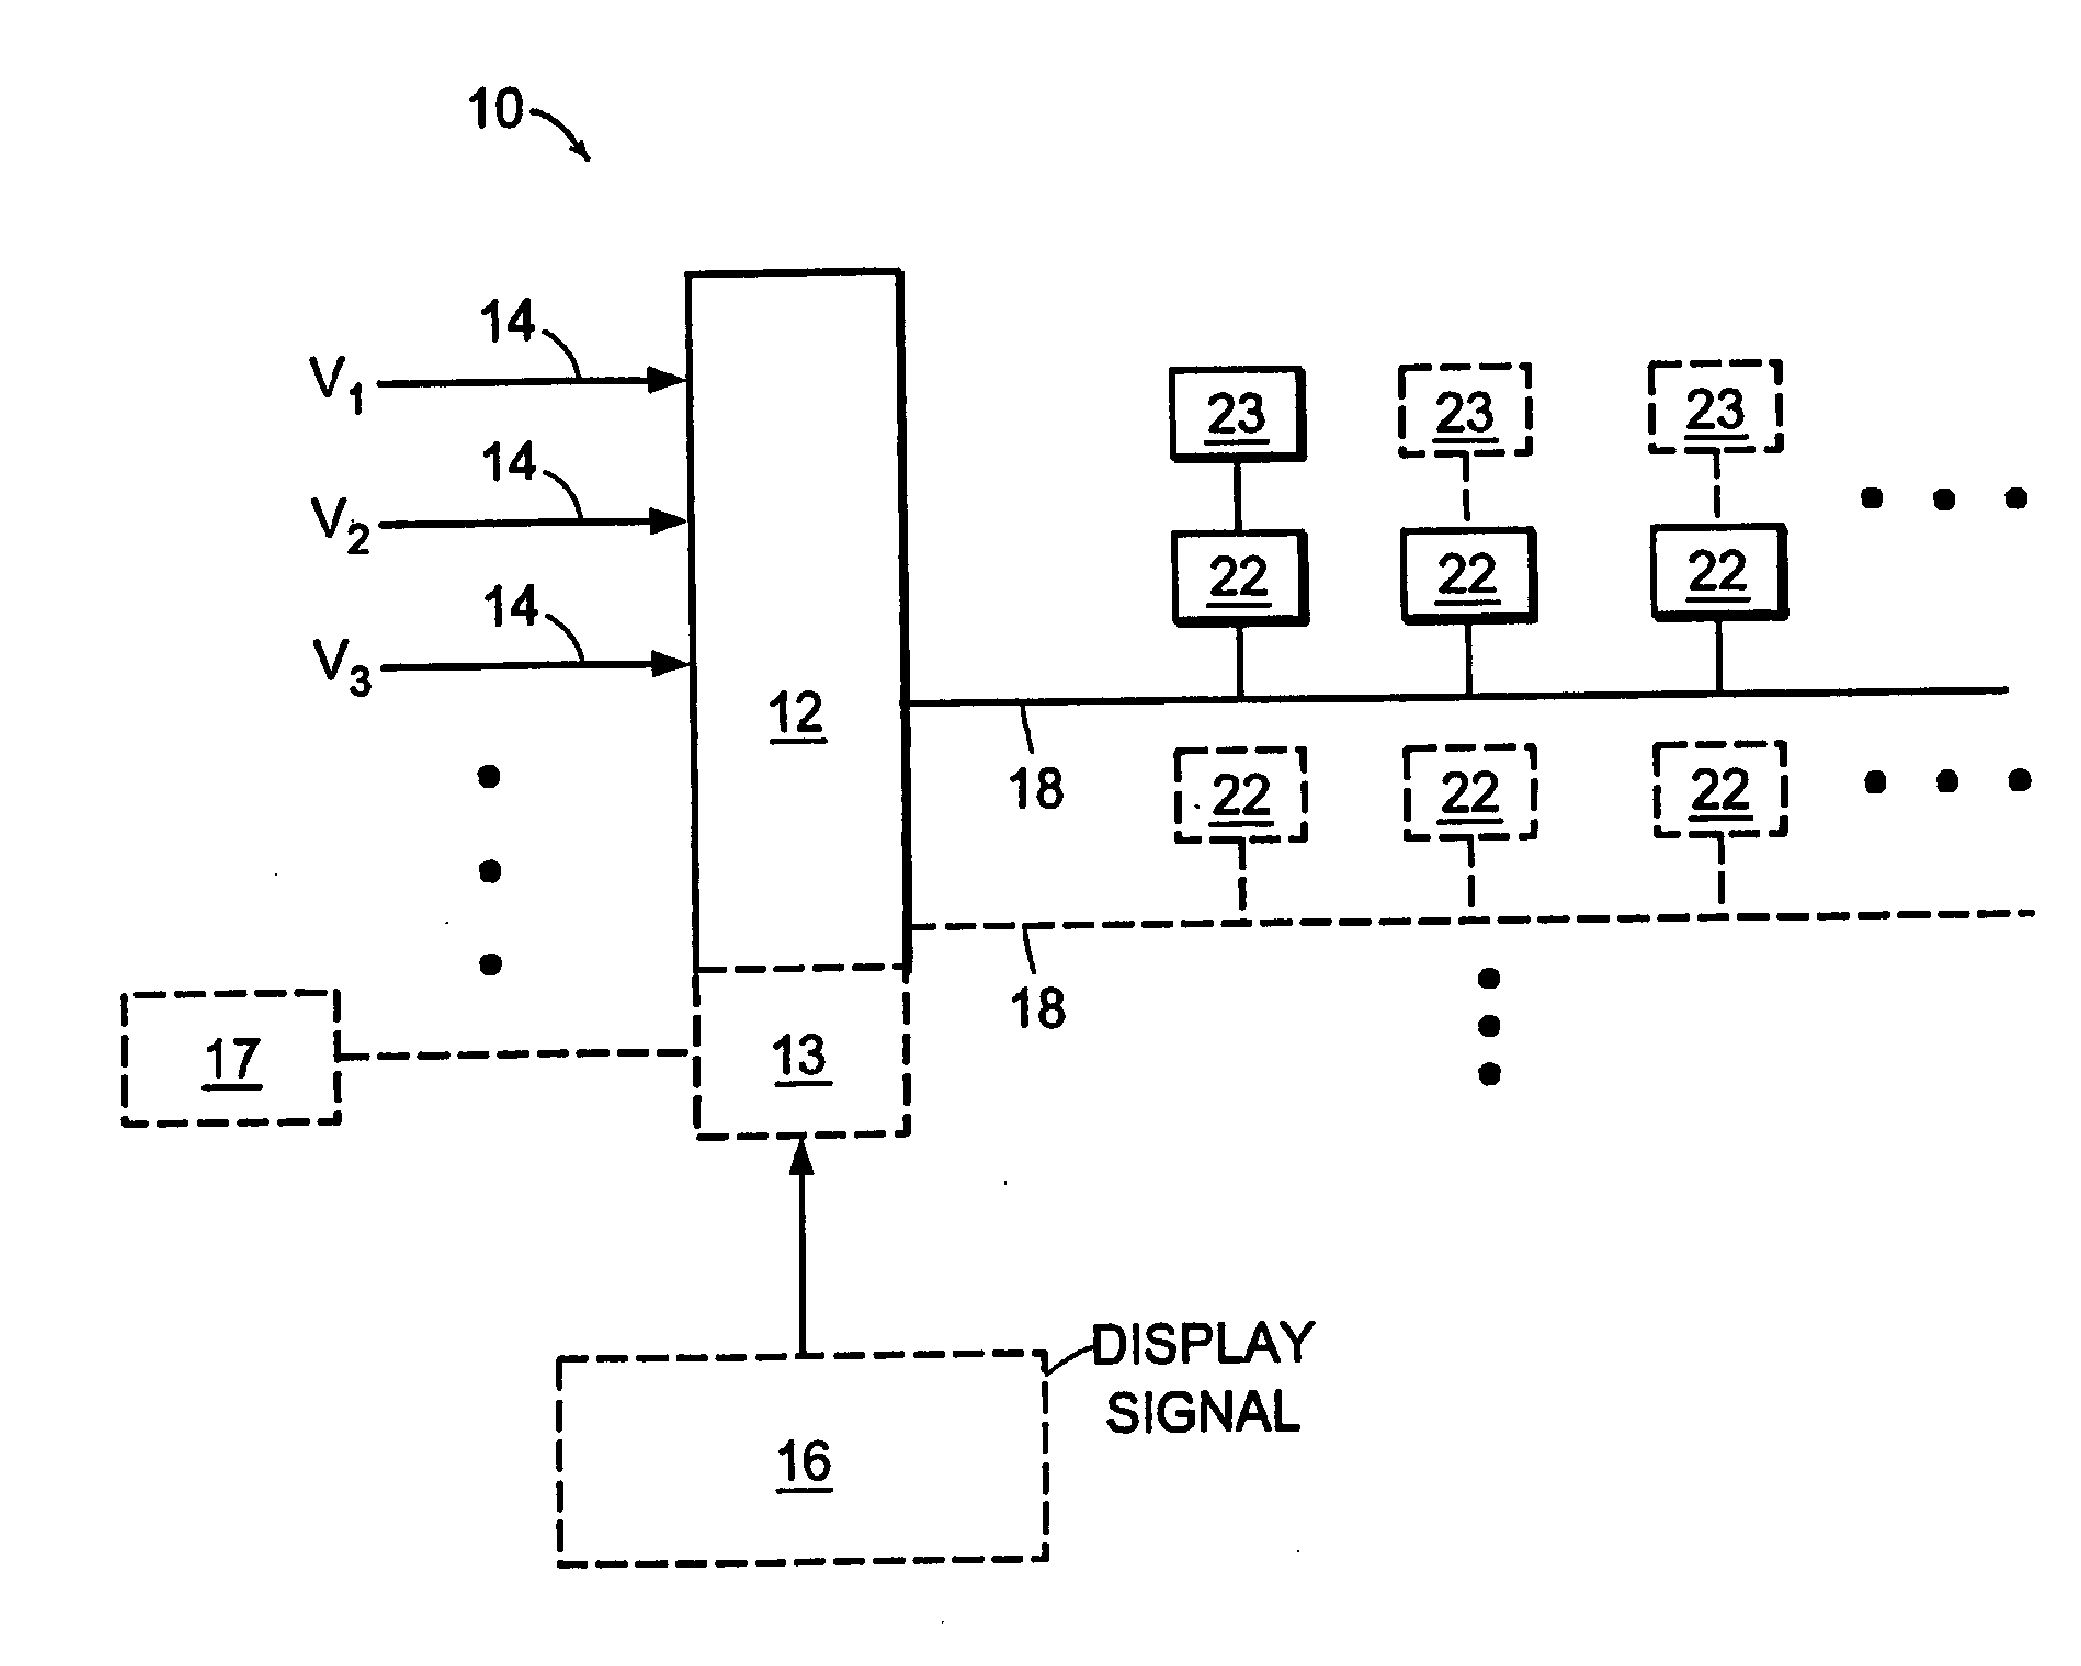 Voltage modulated driver circuits for electro-optic displays